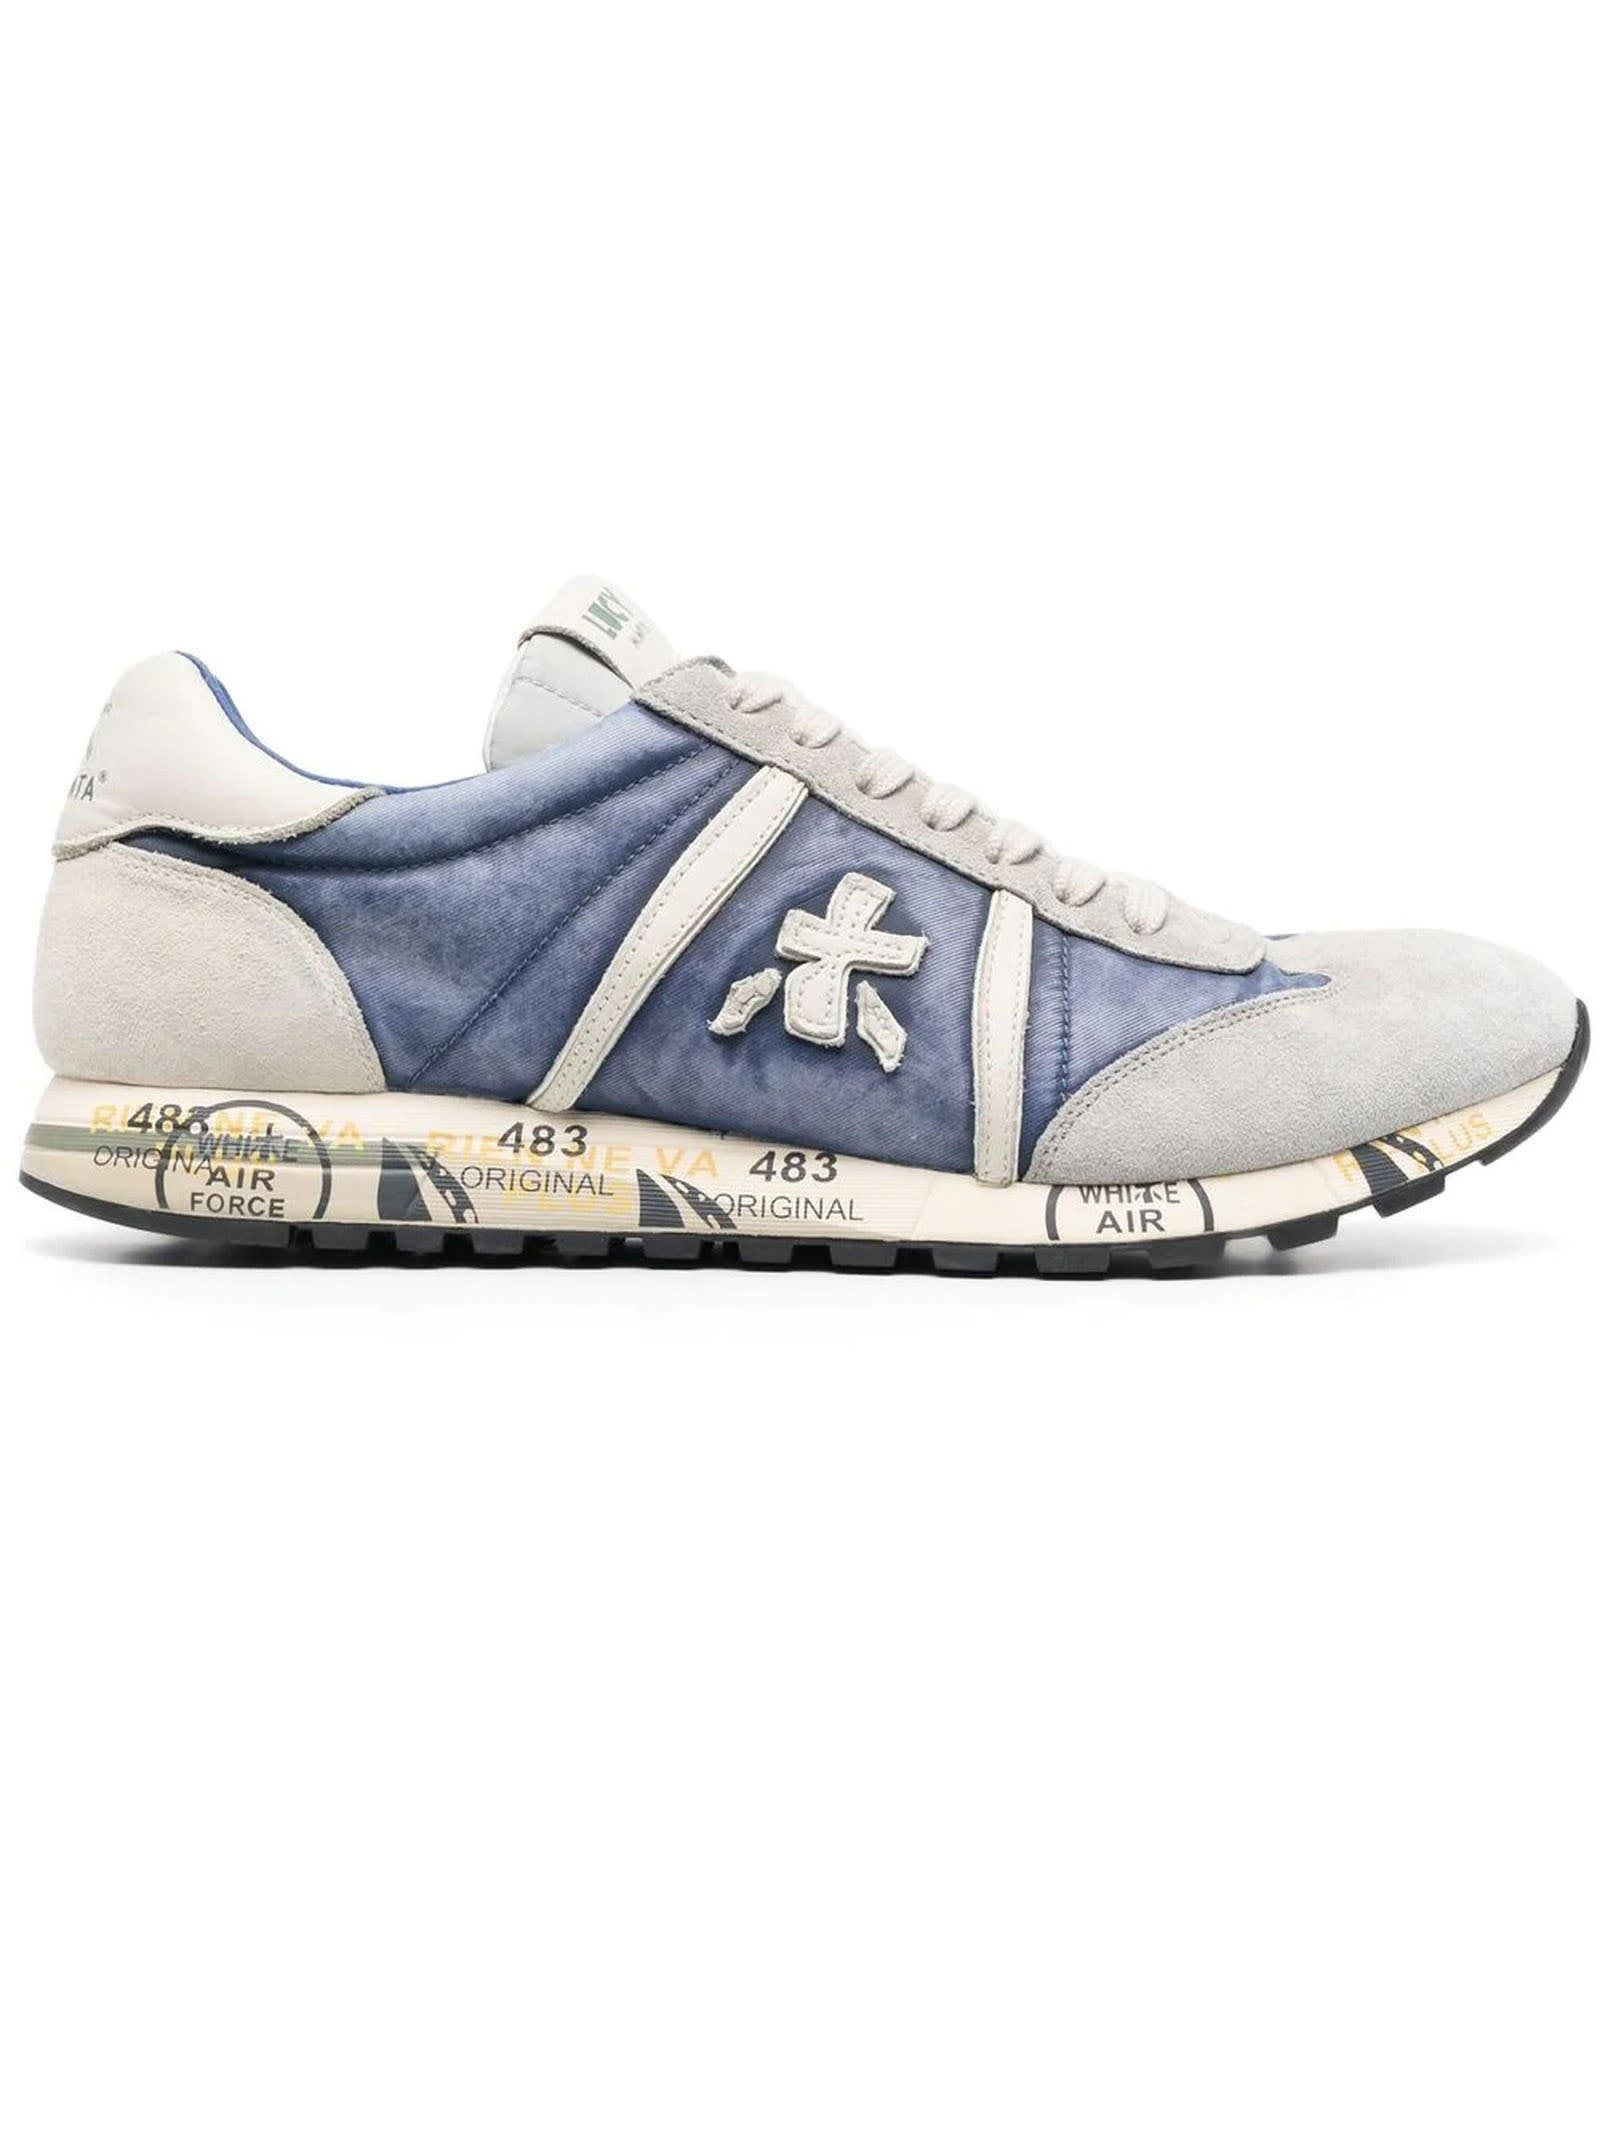 PREMIATA GREY AND BLUE LUCY SNEAKERS